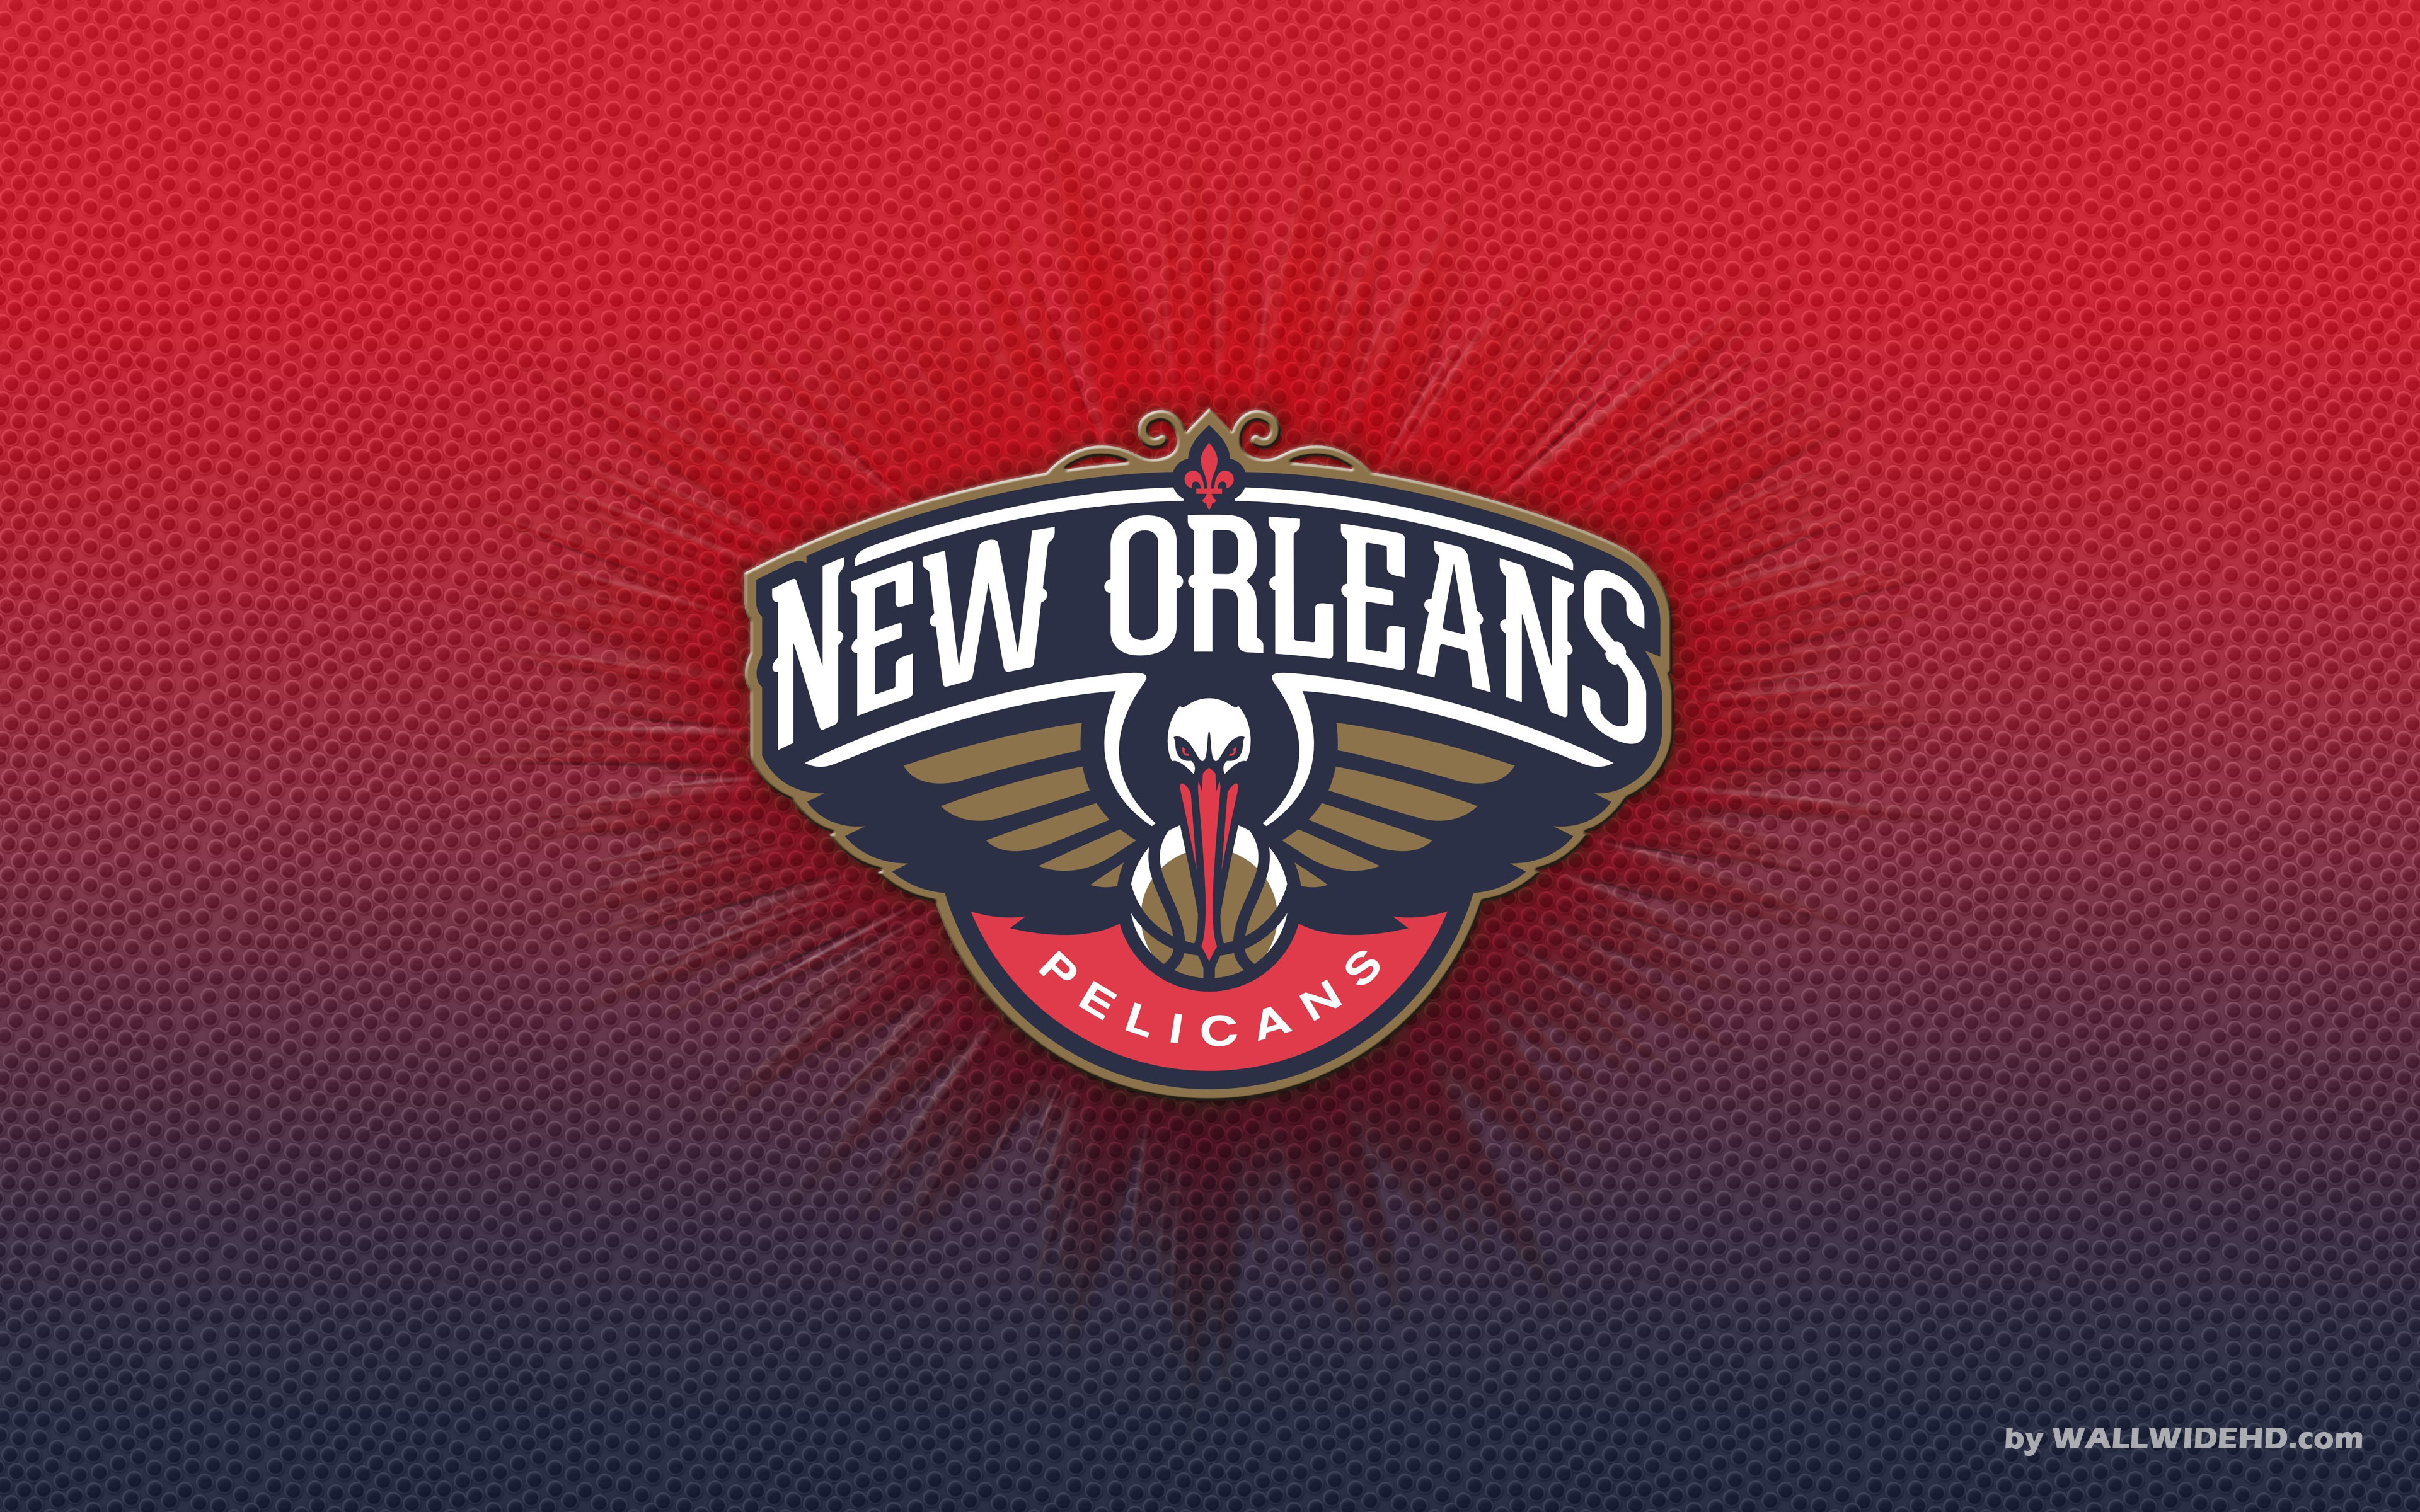 HQ New Orleans Pelicans Wallpapers | File 1367.63Kb